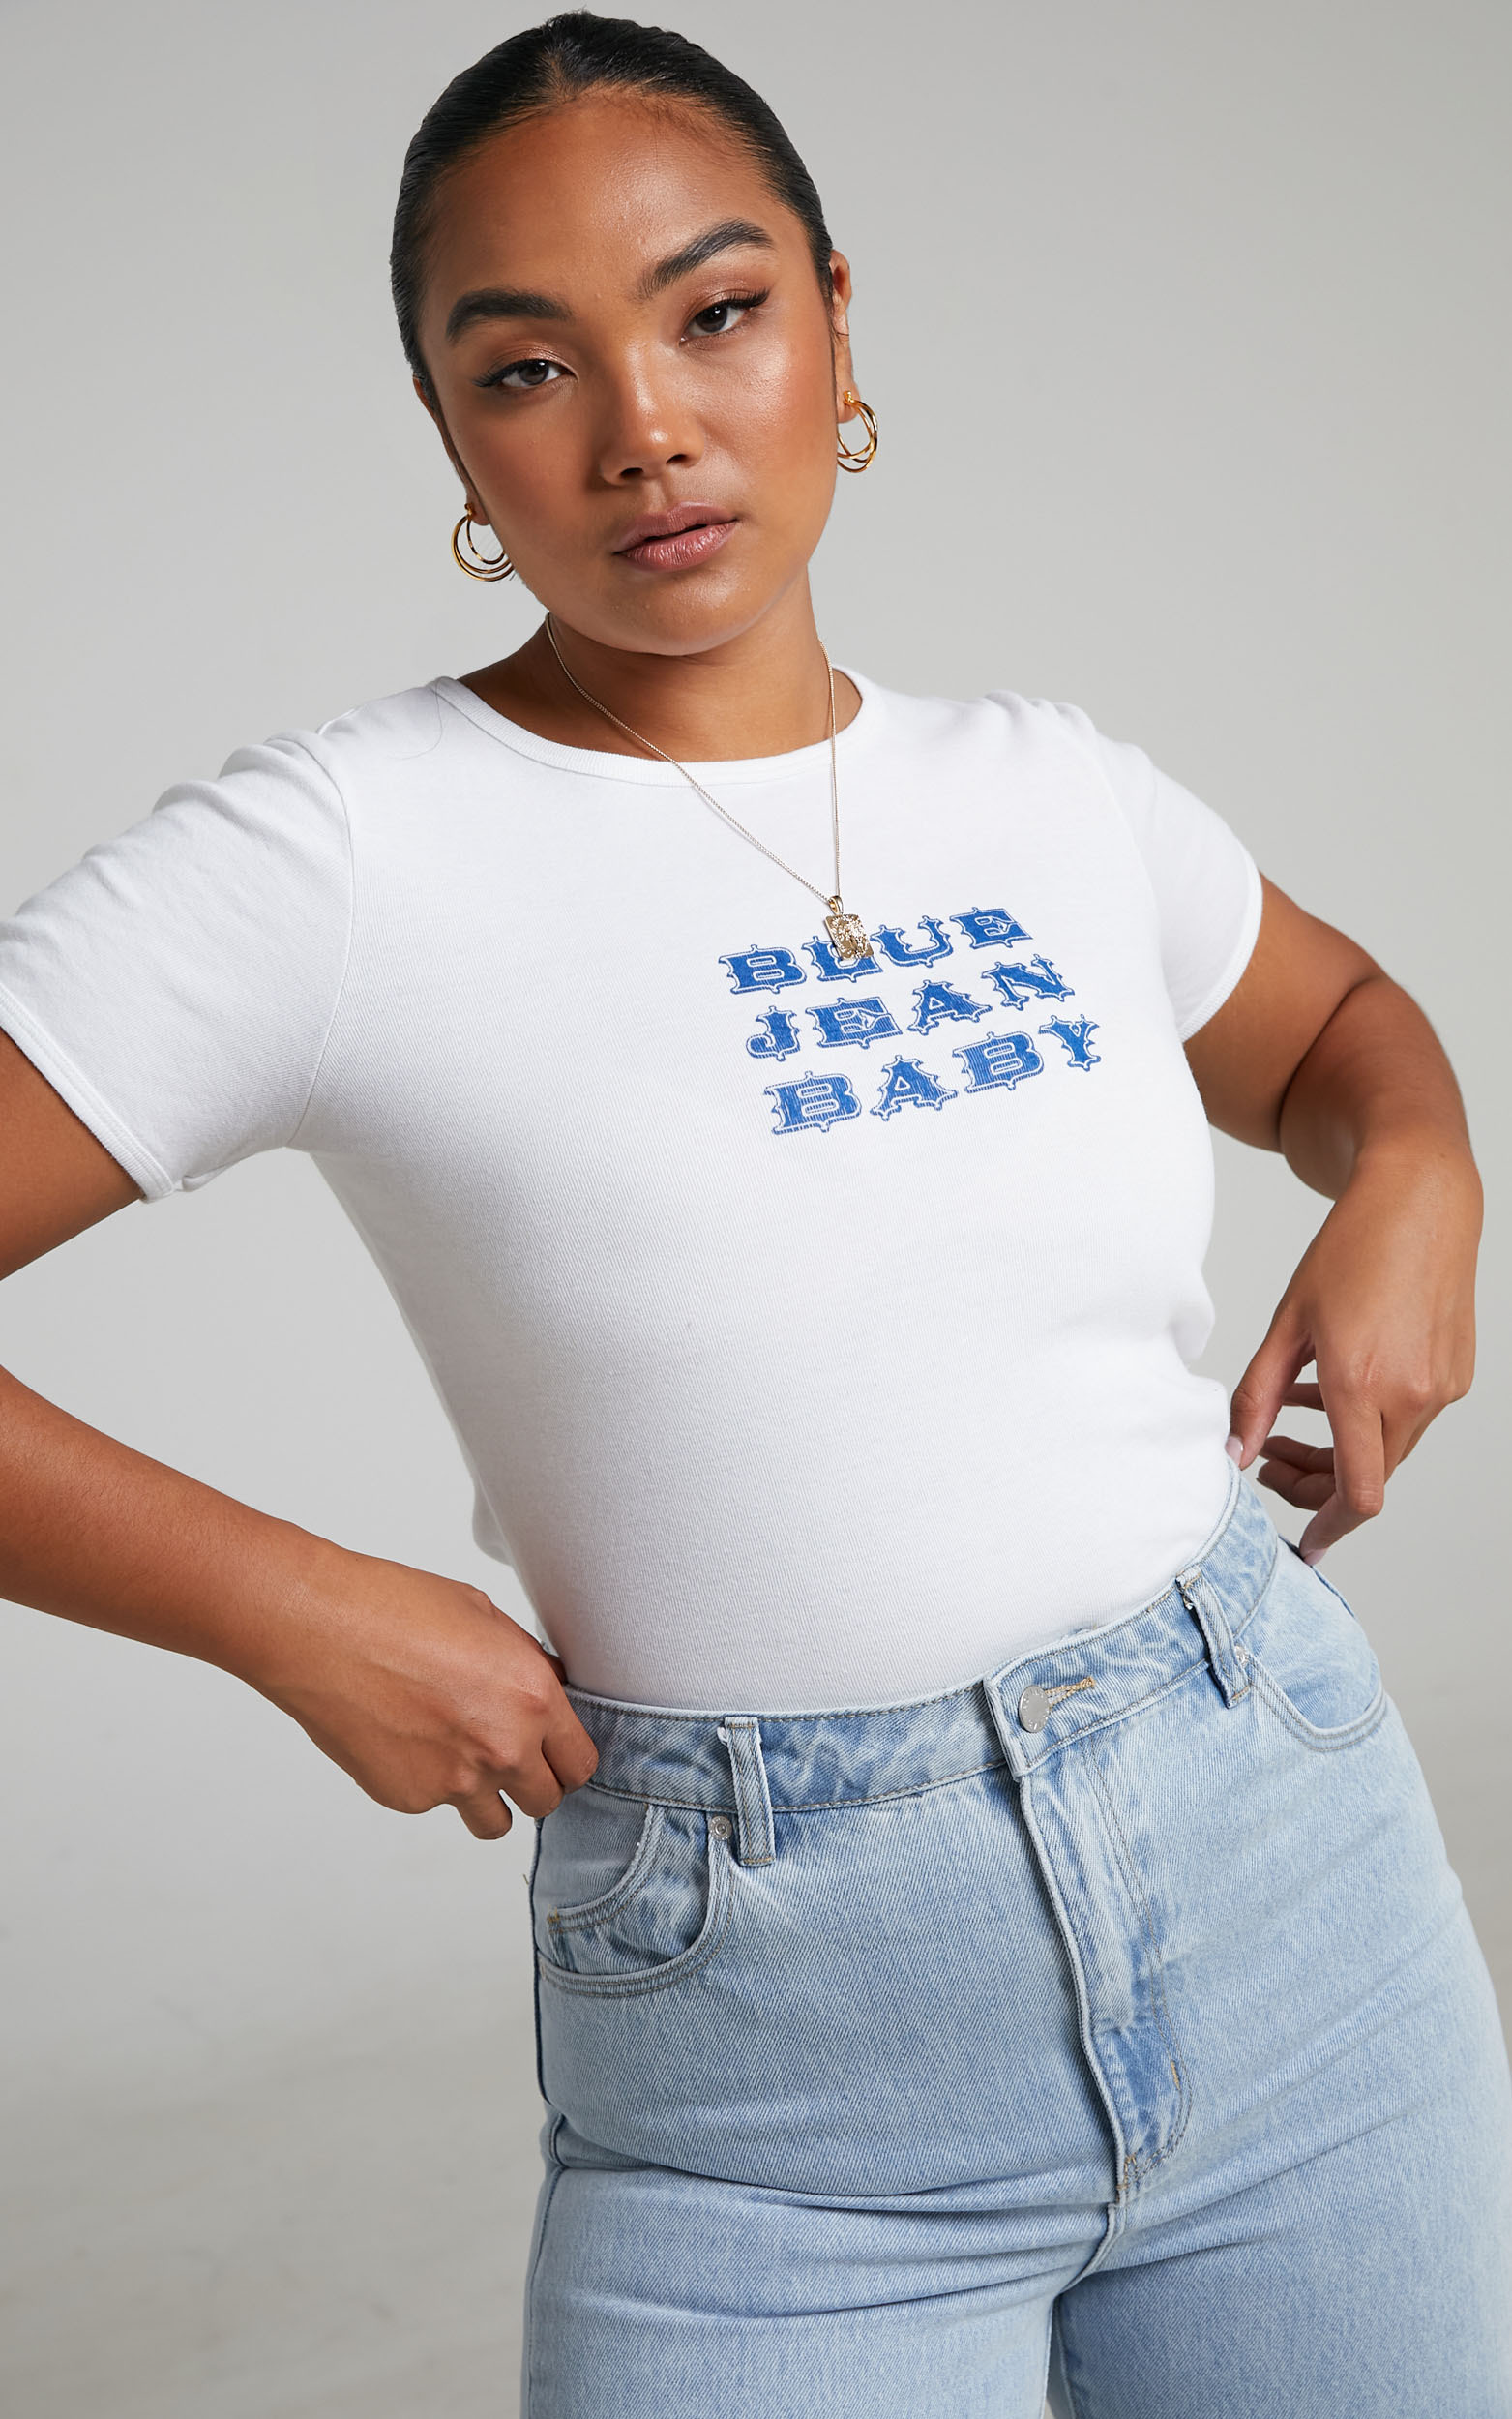 Rolla's - Blue Jean Tight Rib Tee in White - 06, WHT1, hi-res image number null